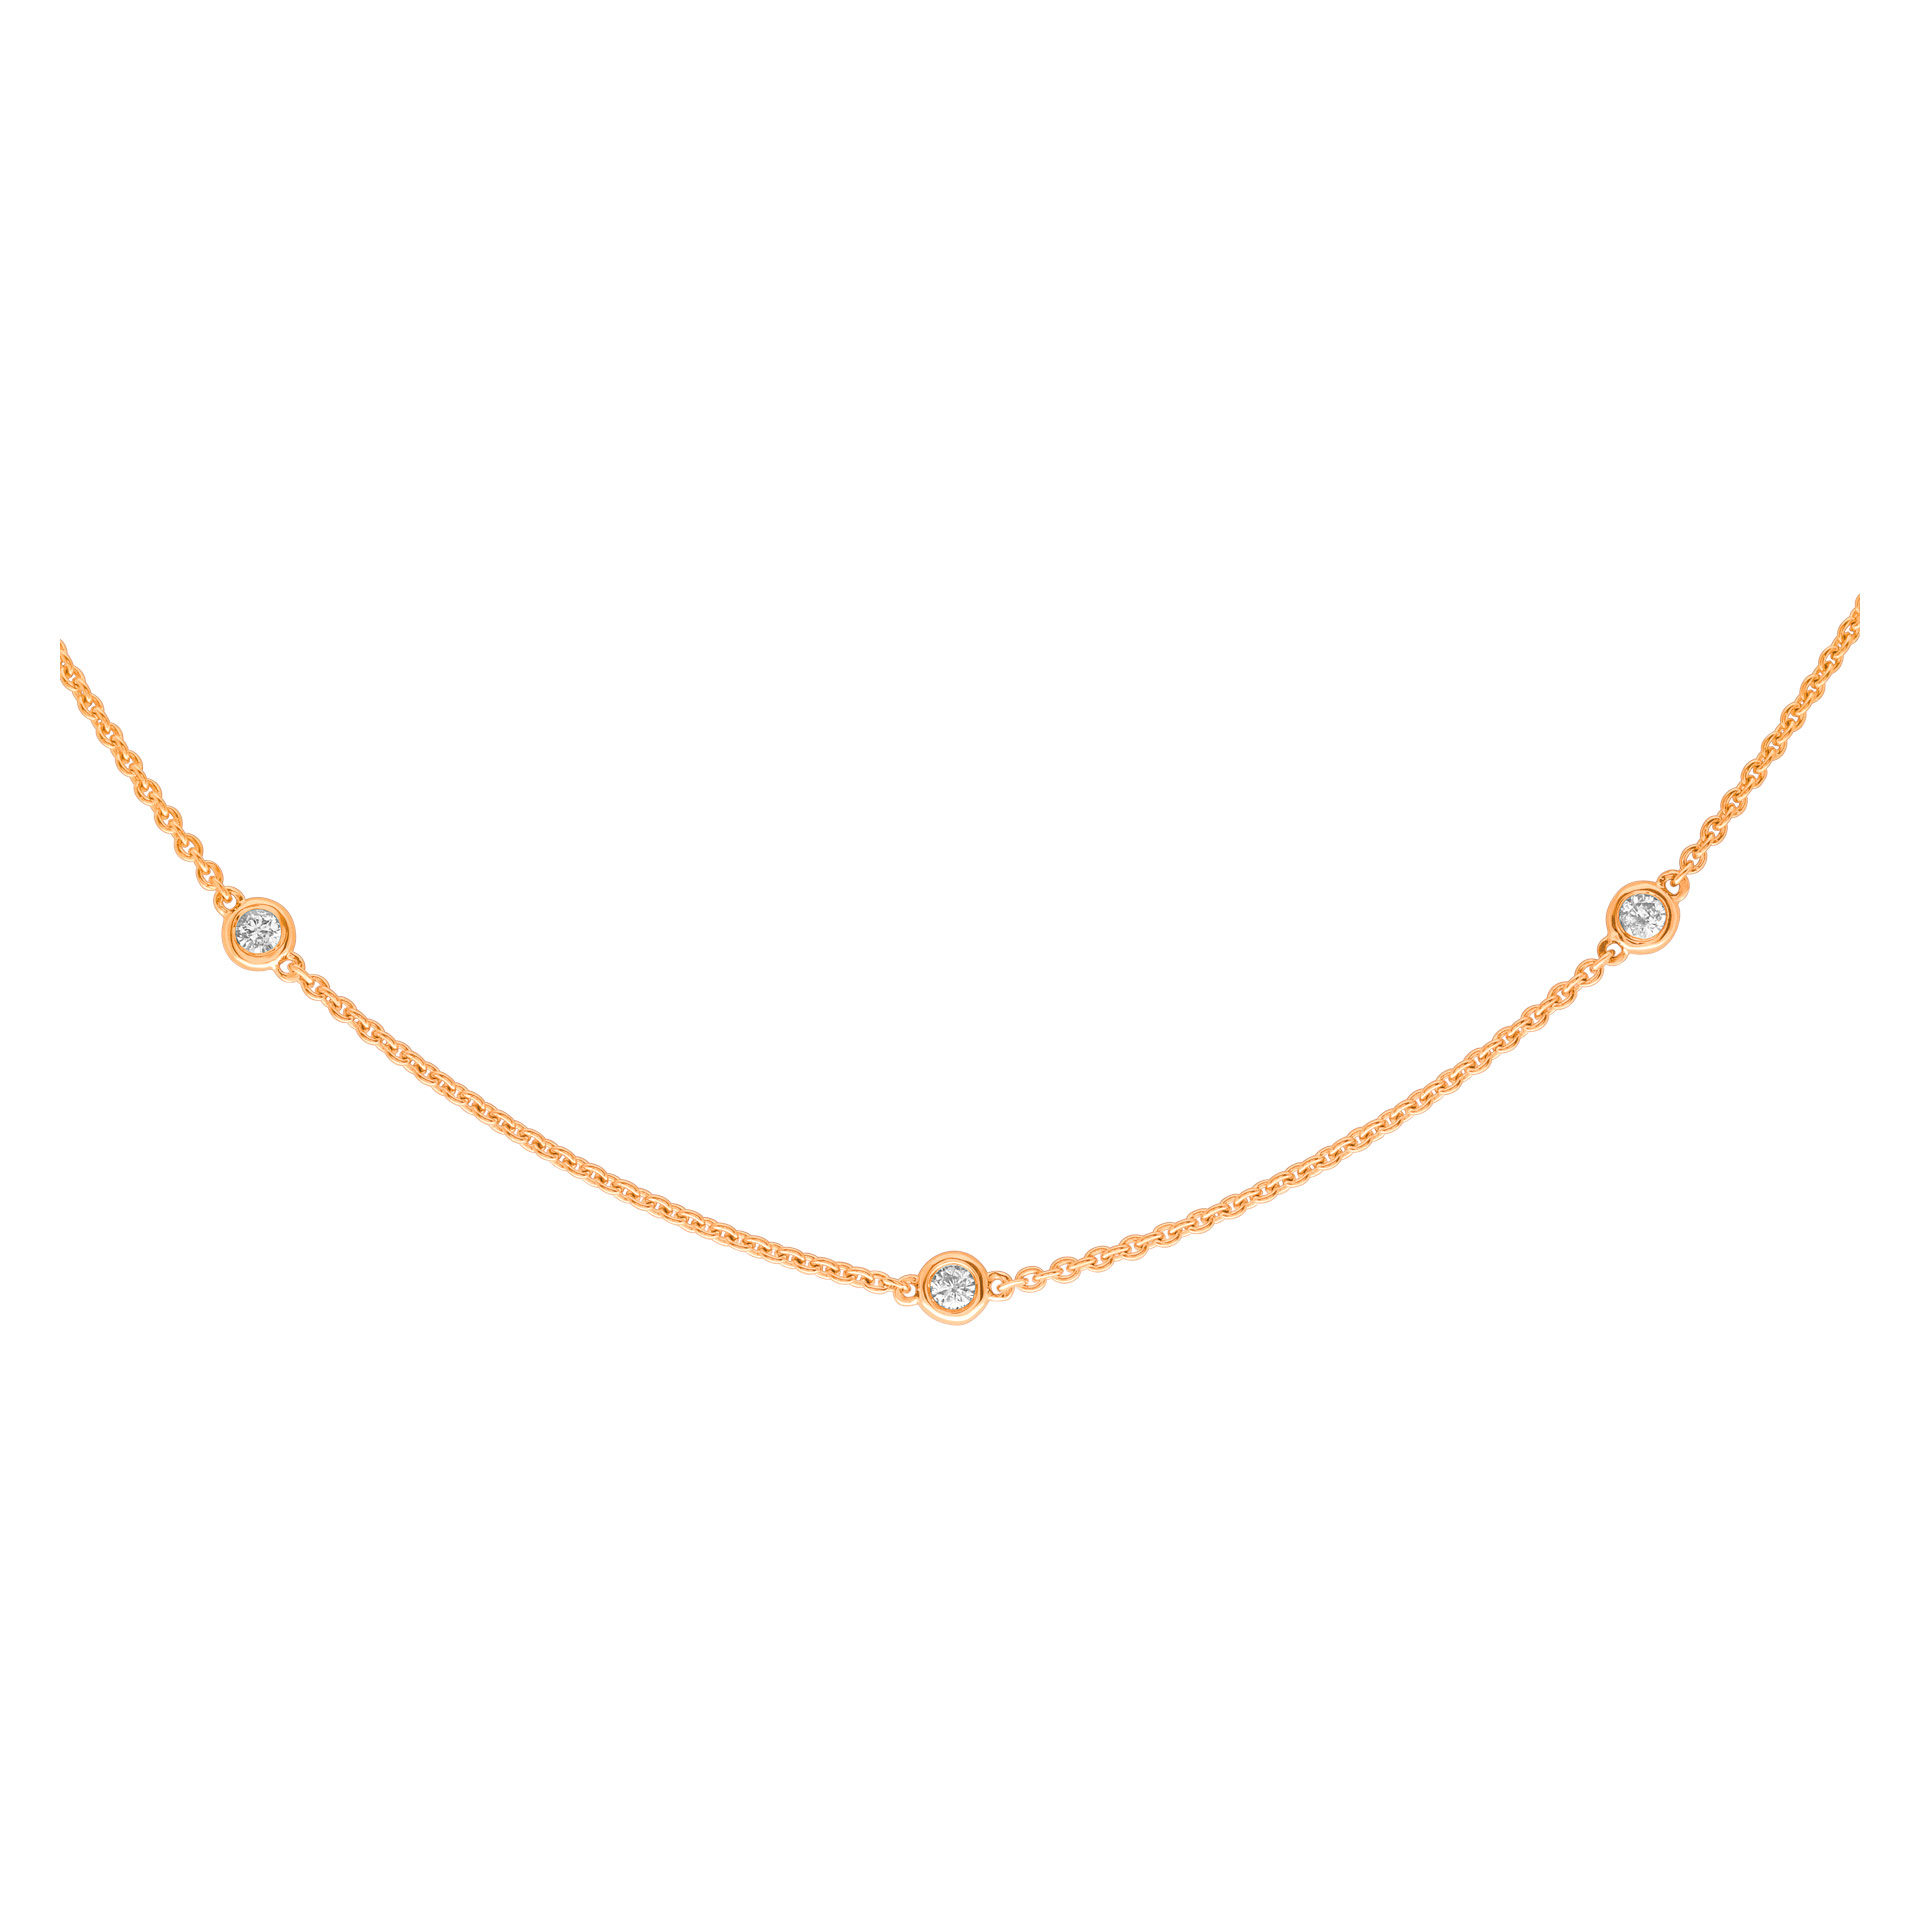 Diamonds by the yard 14k rose gold 1.05 cts in diamonds image 1